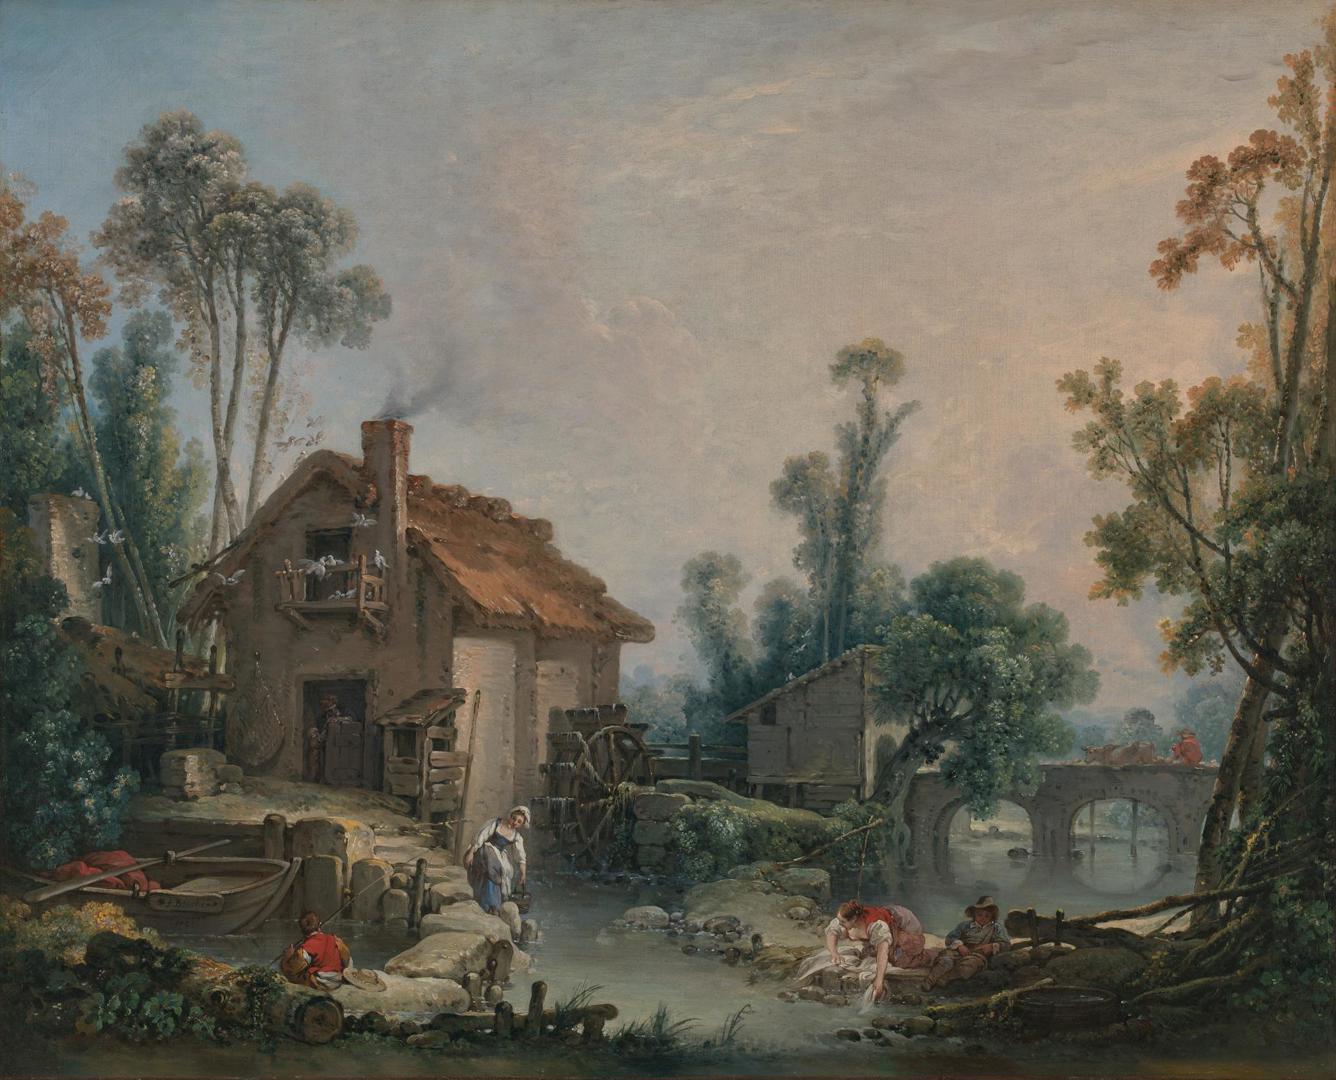 Landscape with a Watermill by François Boucher